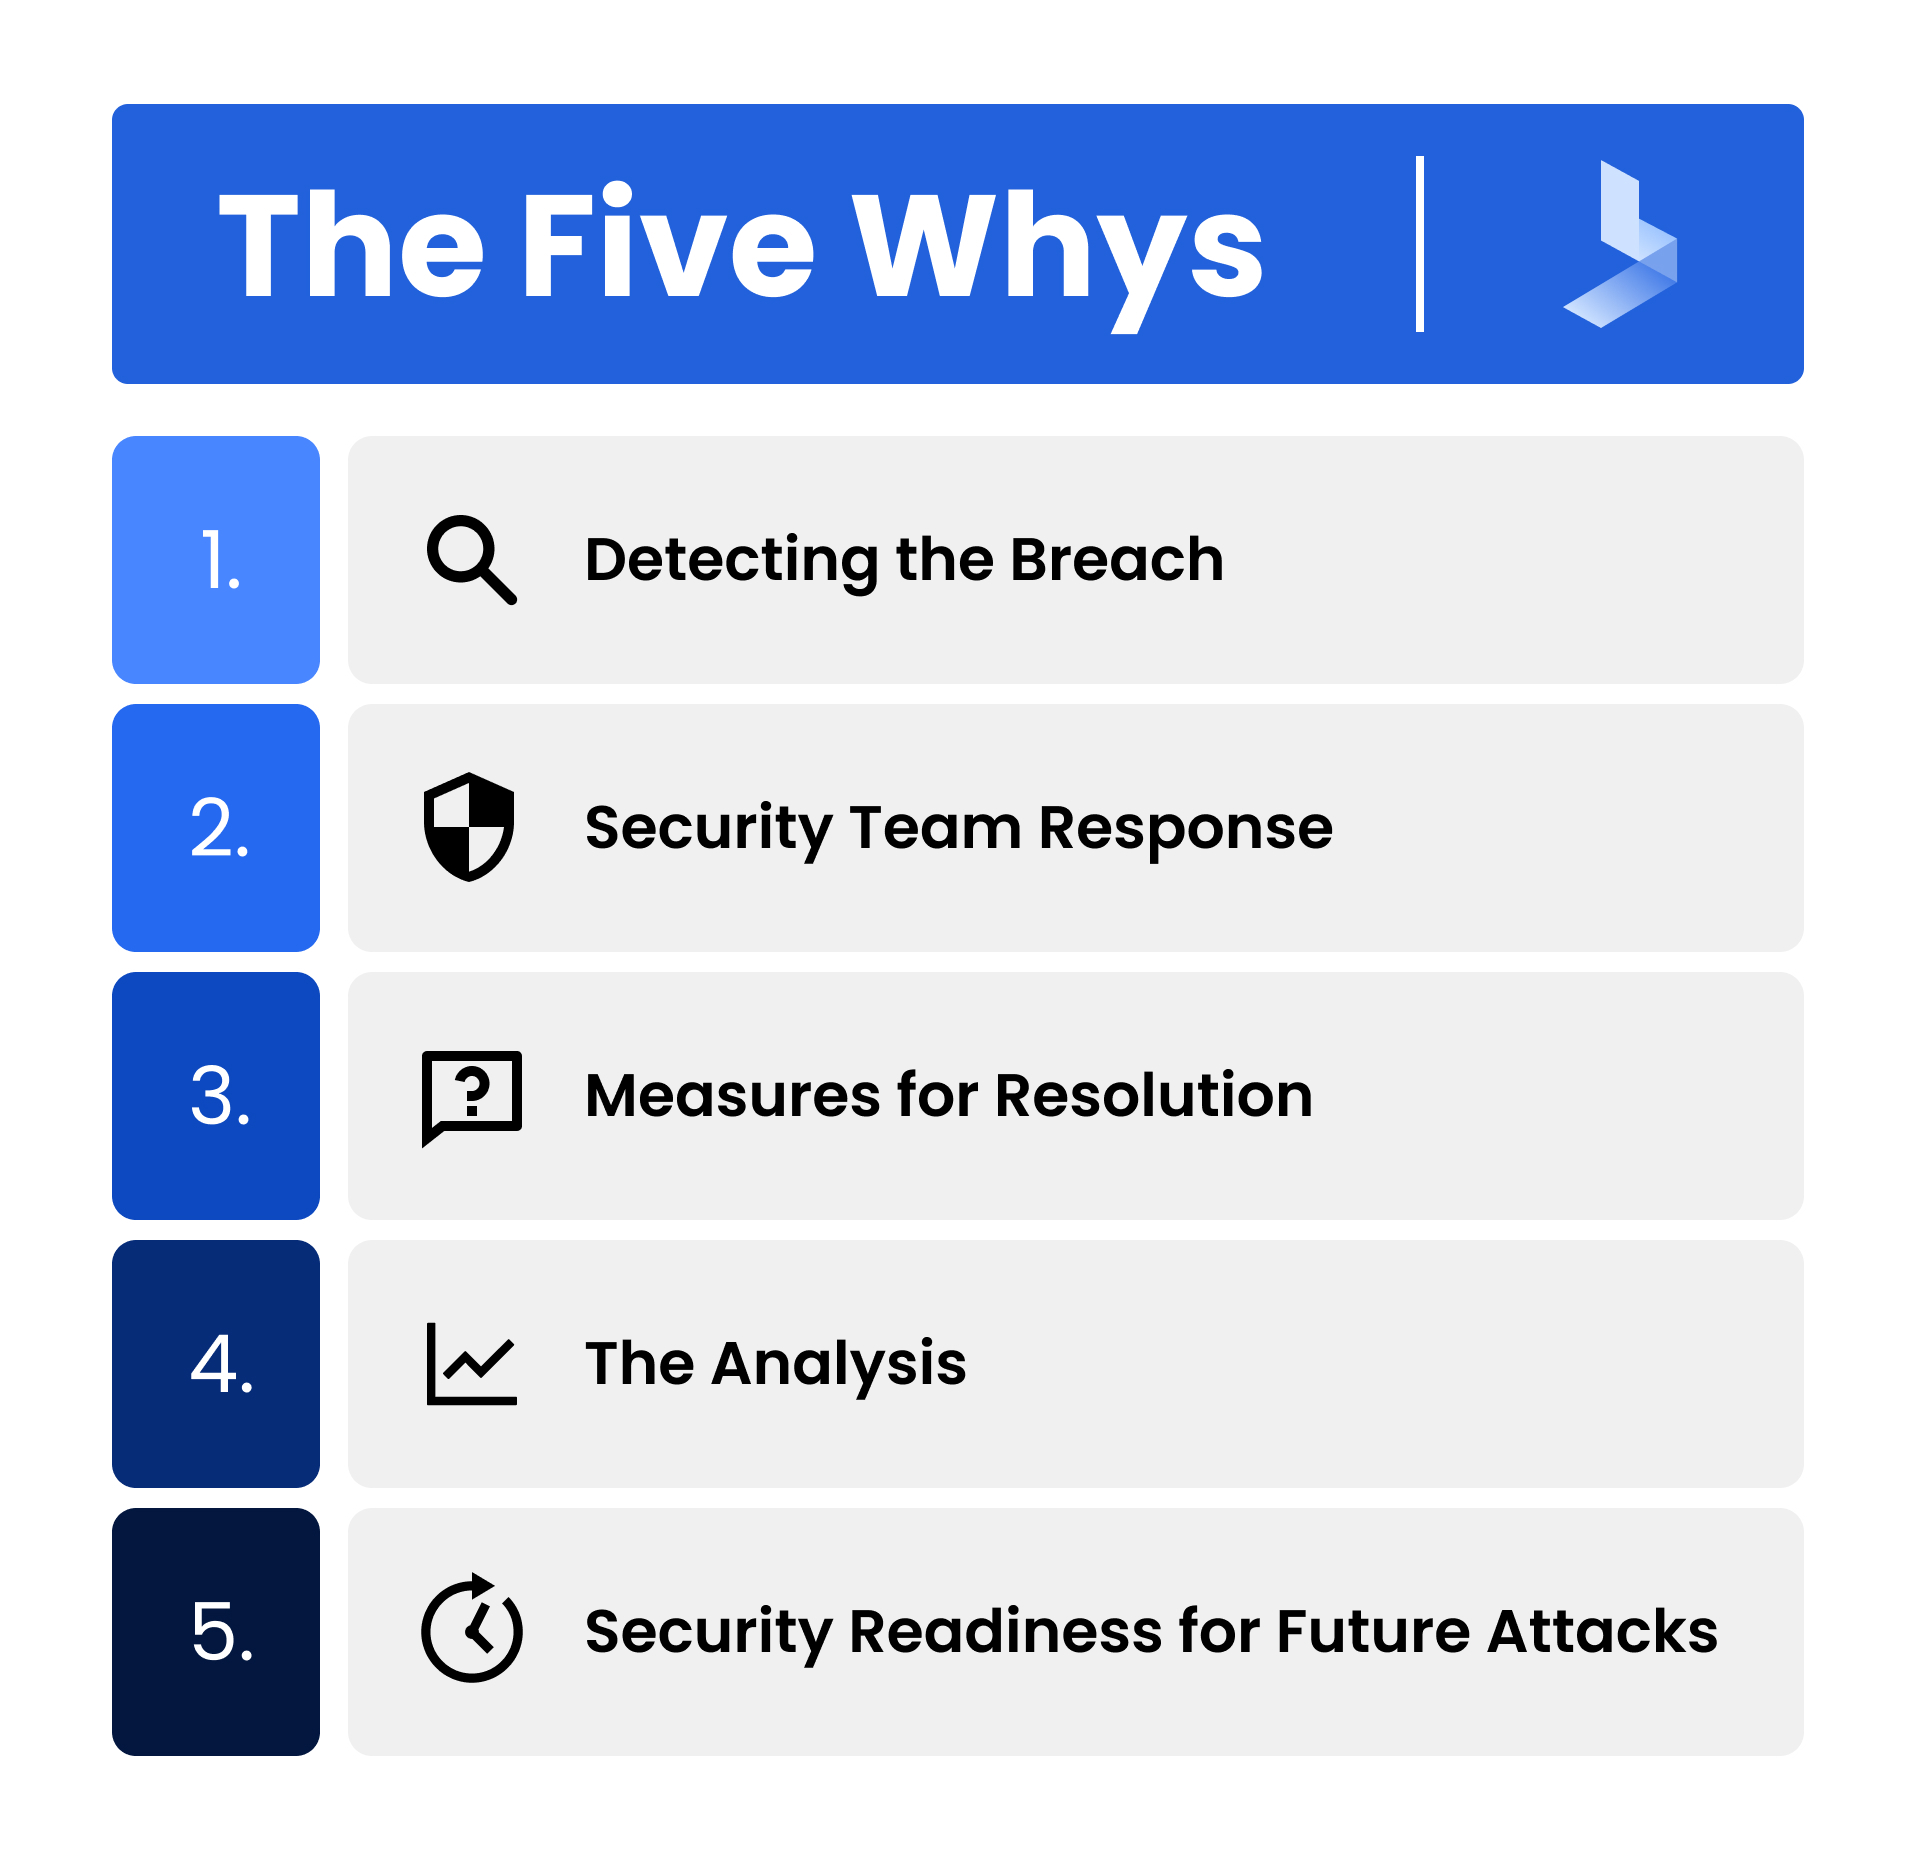 The Five Whys (1)